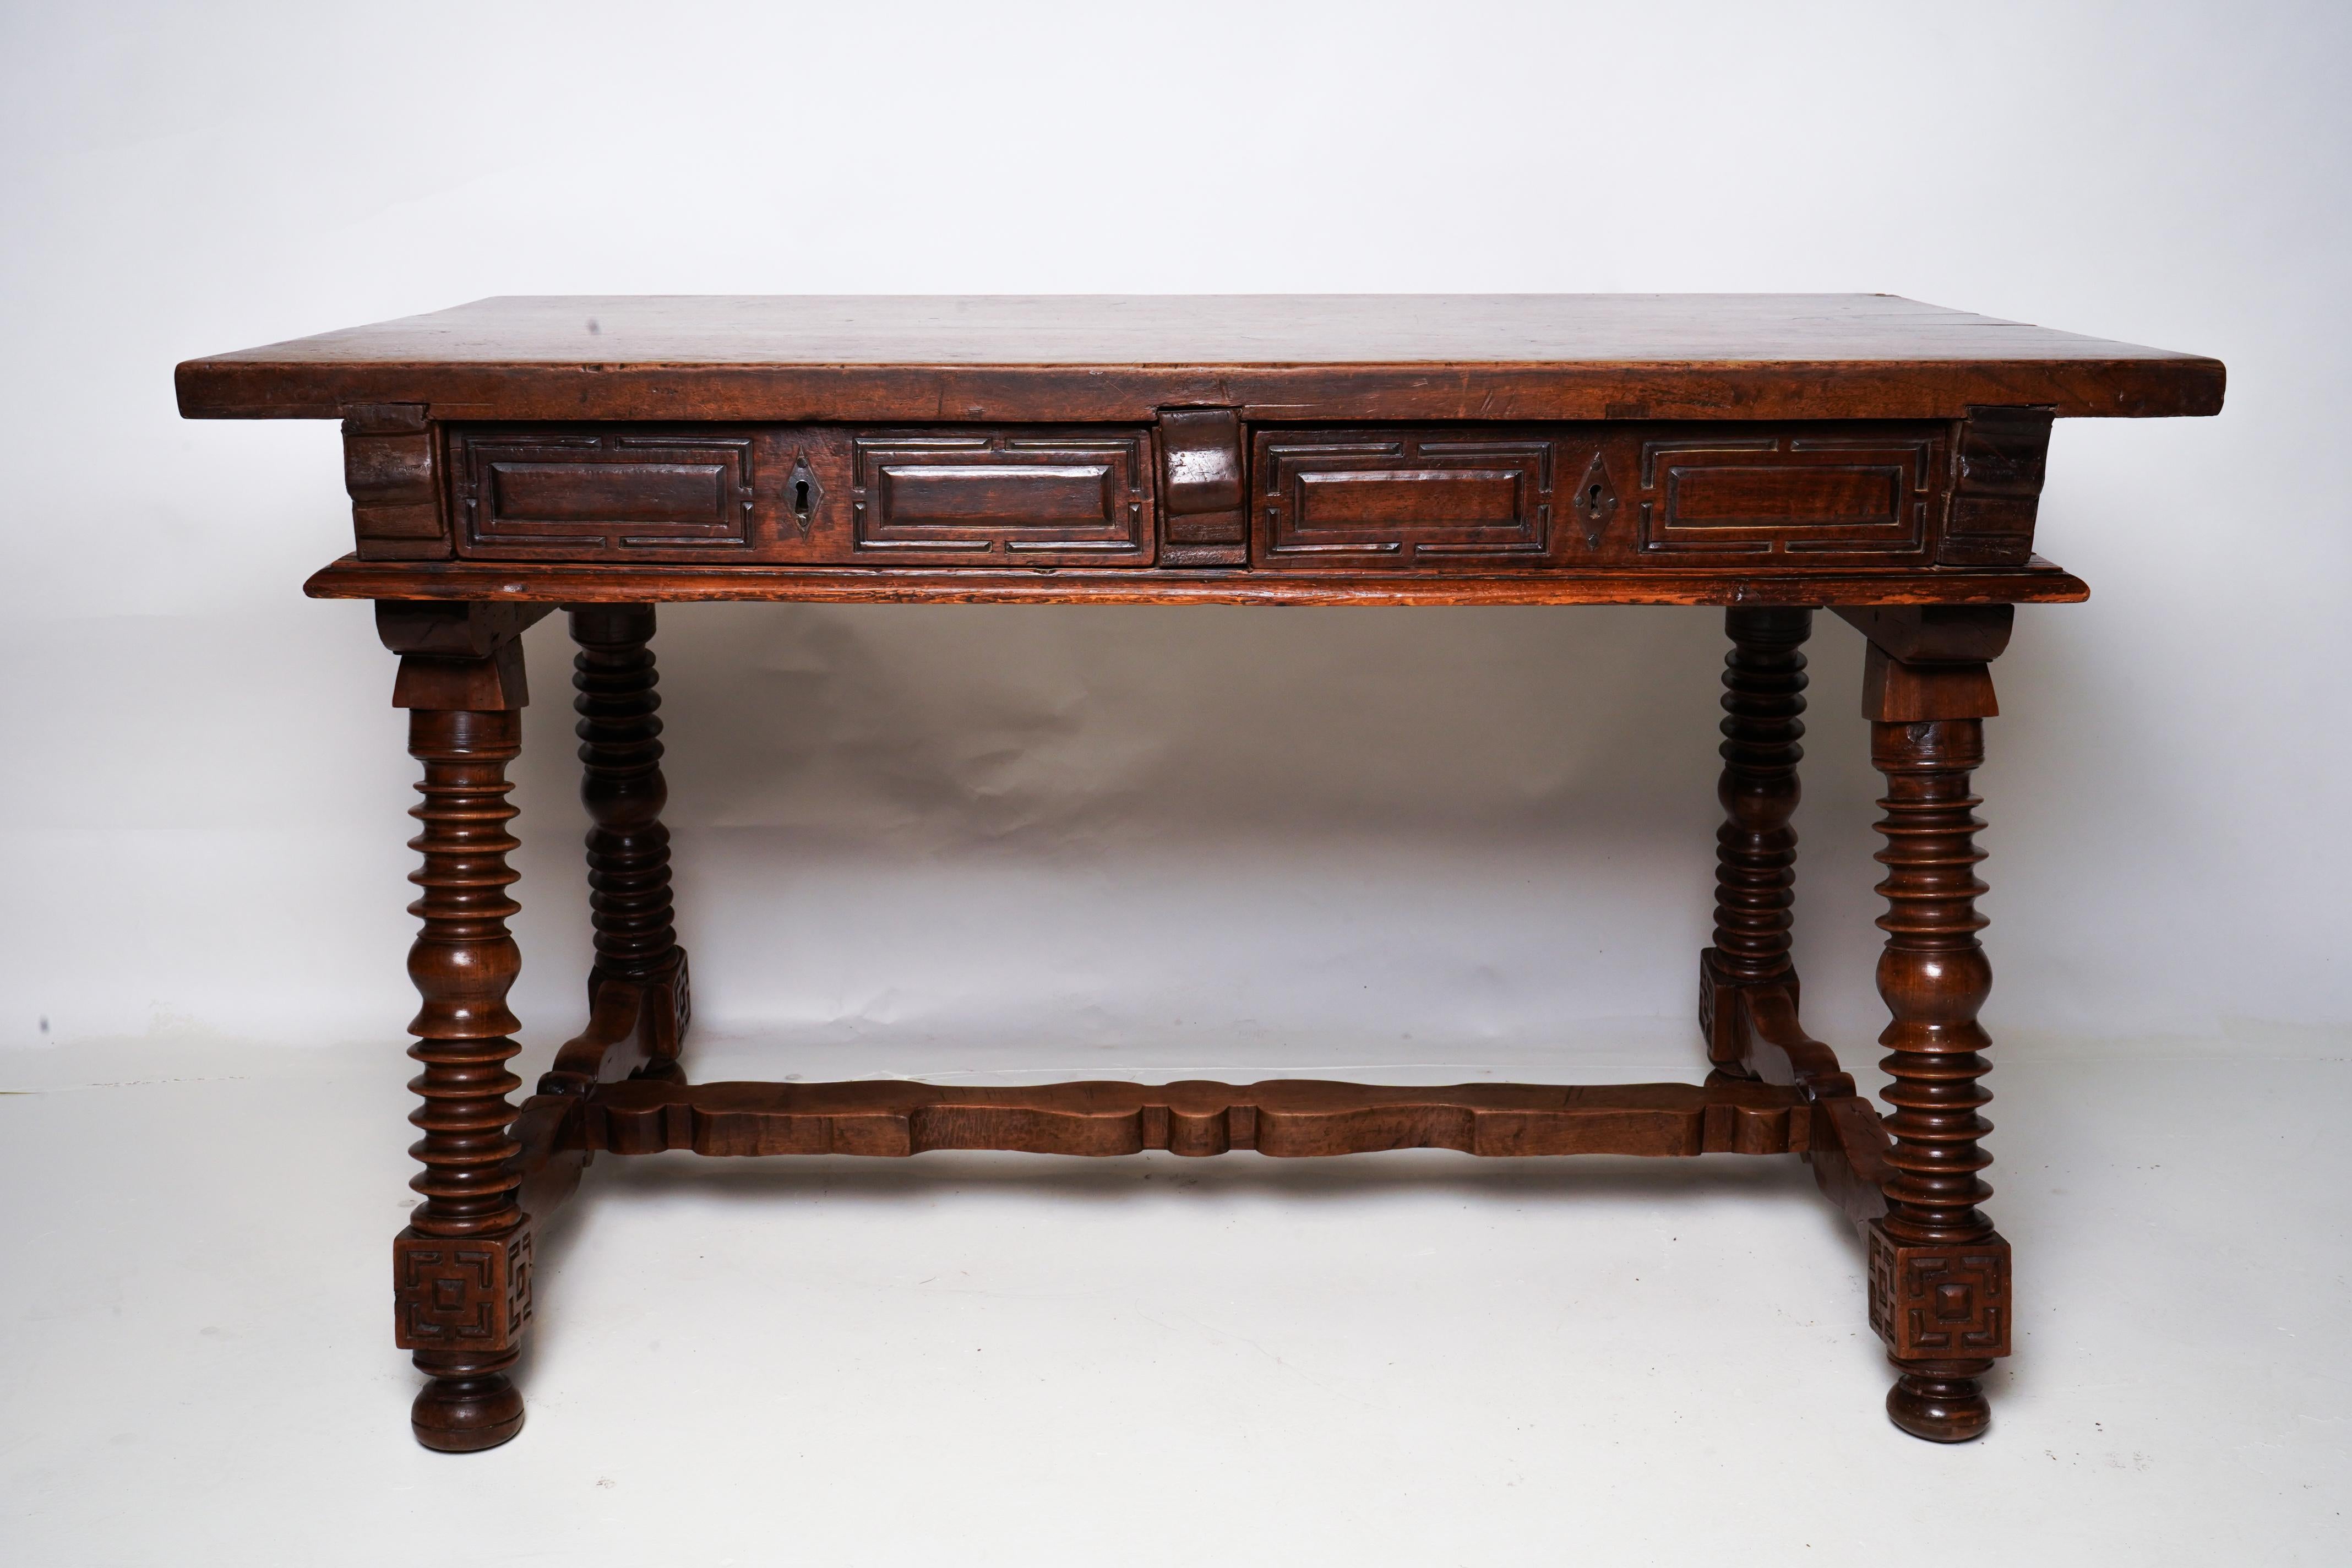 An 18th century Spanish baroque desk, or writing table made of solid Walnut Wood with turned legs joined by a Two drawers with original iron drawer pulls and two false drawers in back. The top is made from two planks of Walnut held together by 3